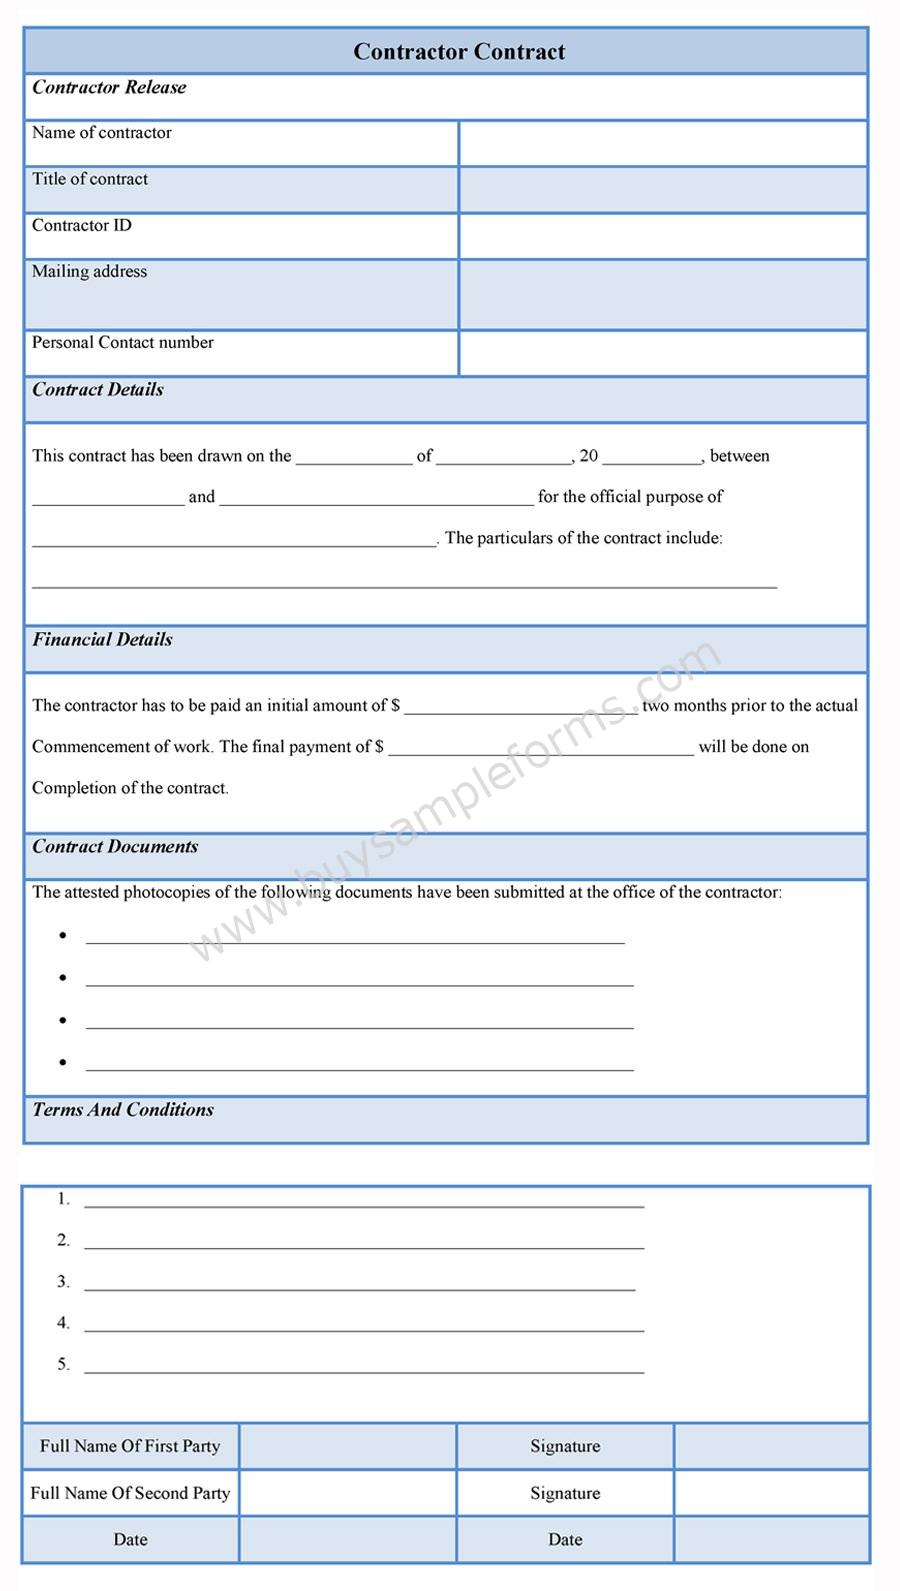 Sample Contractor Contract Form